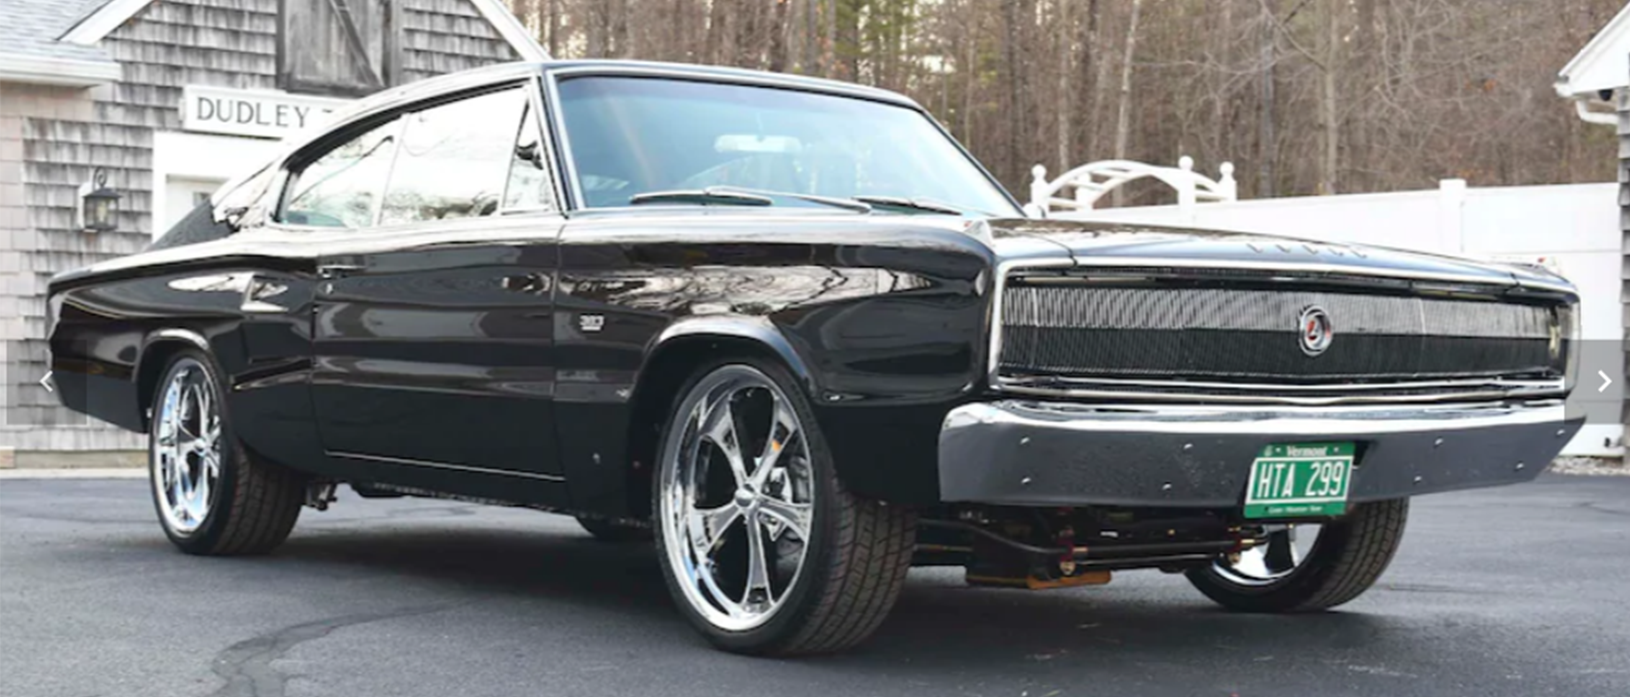 1967 Dodge Charger: Restored and Road-Ready